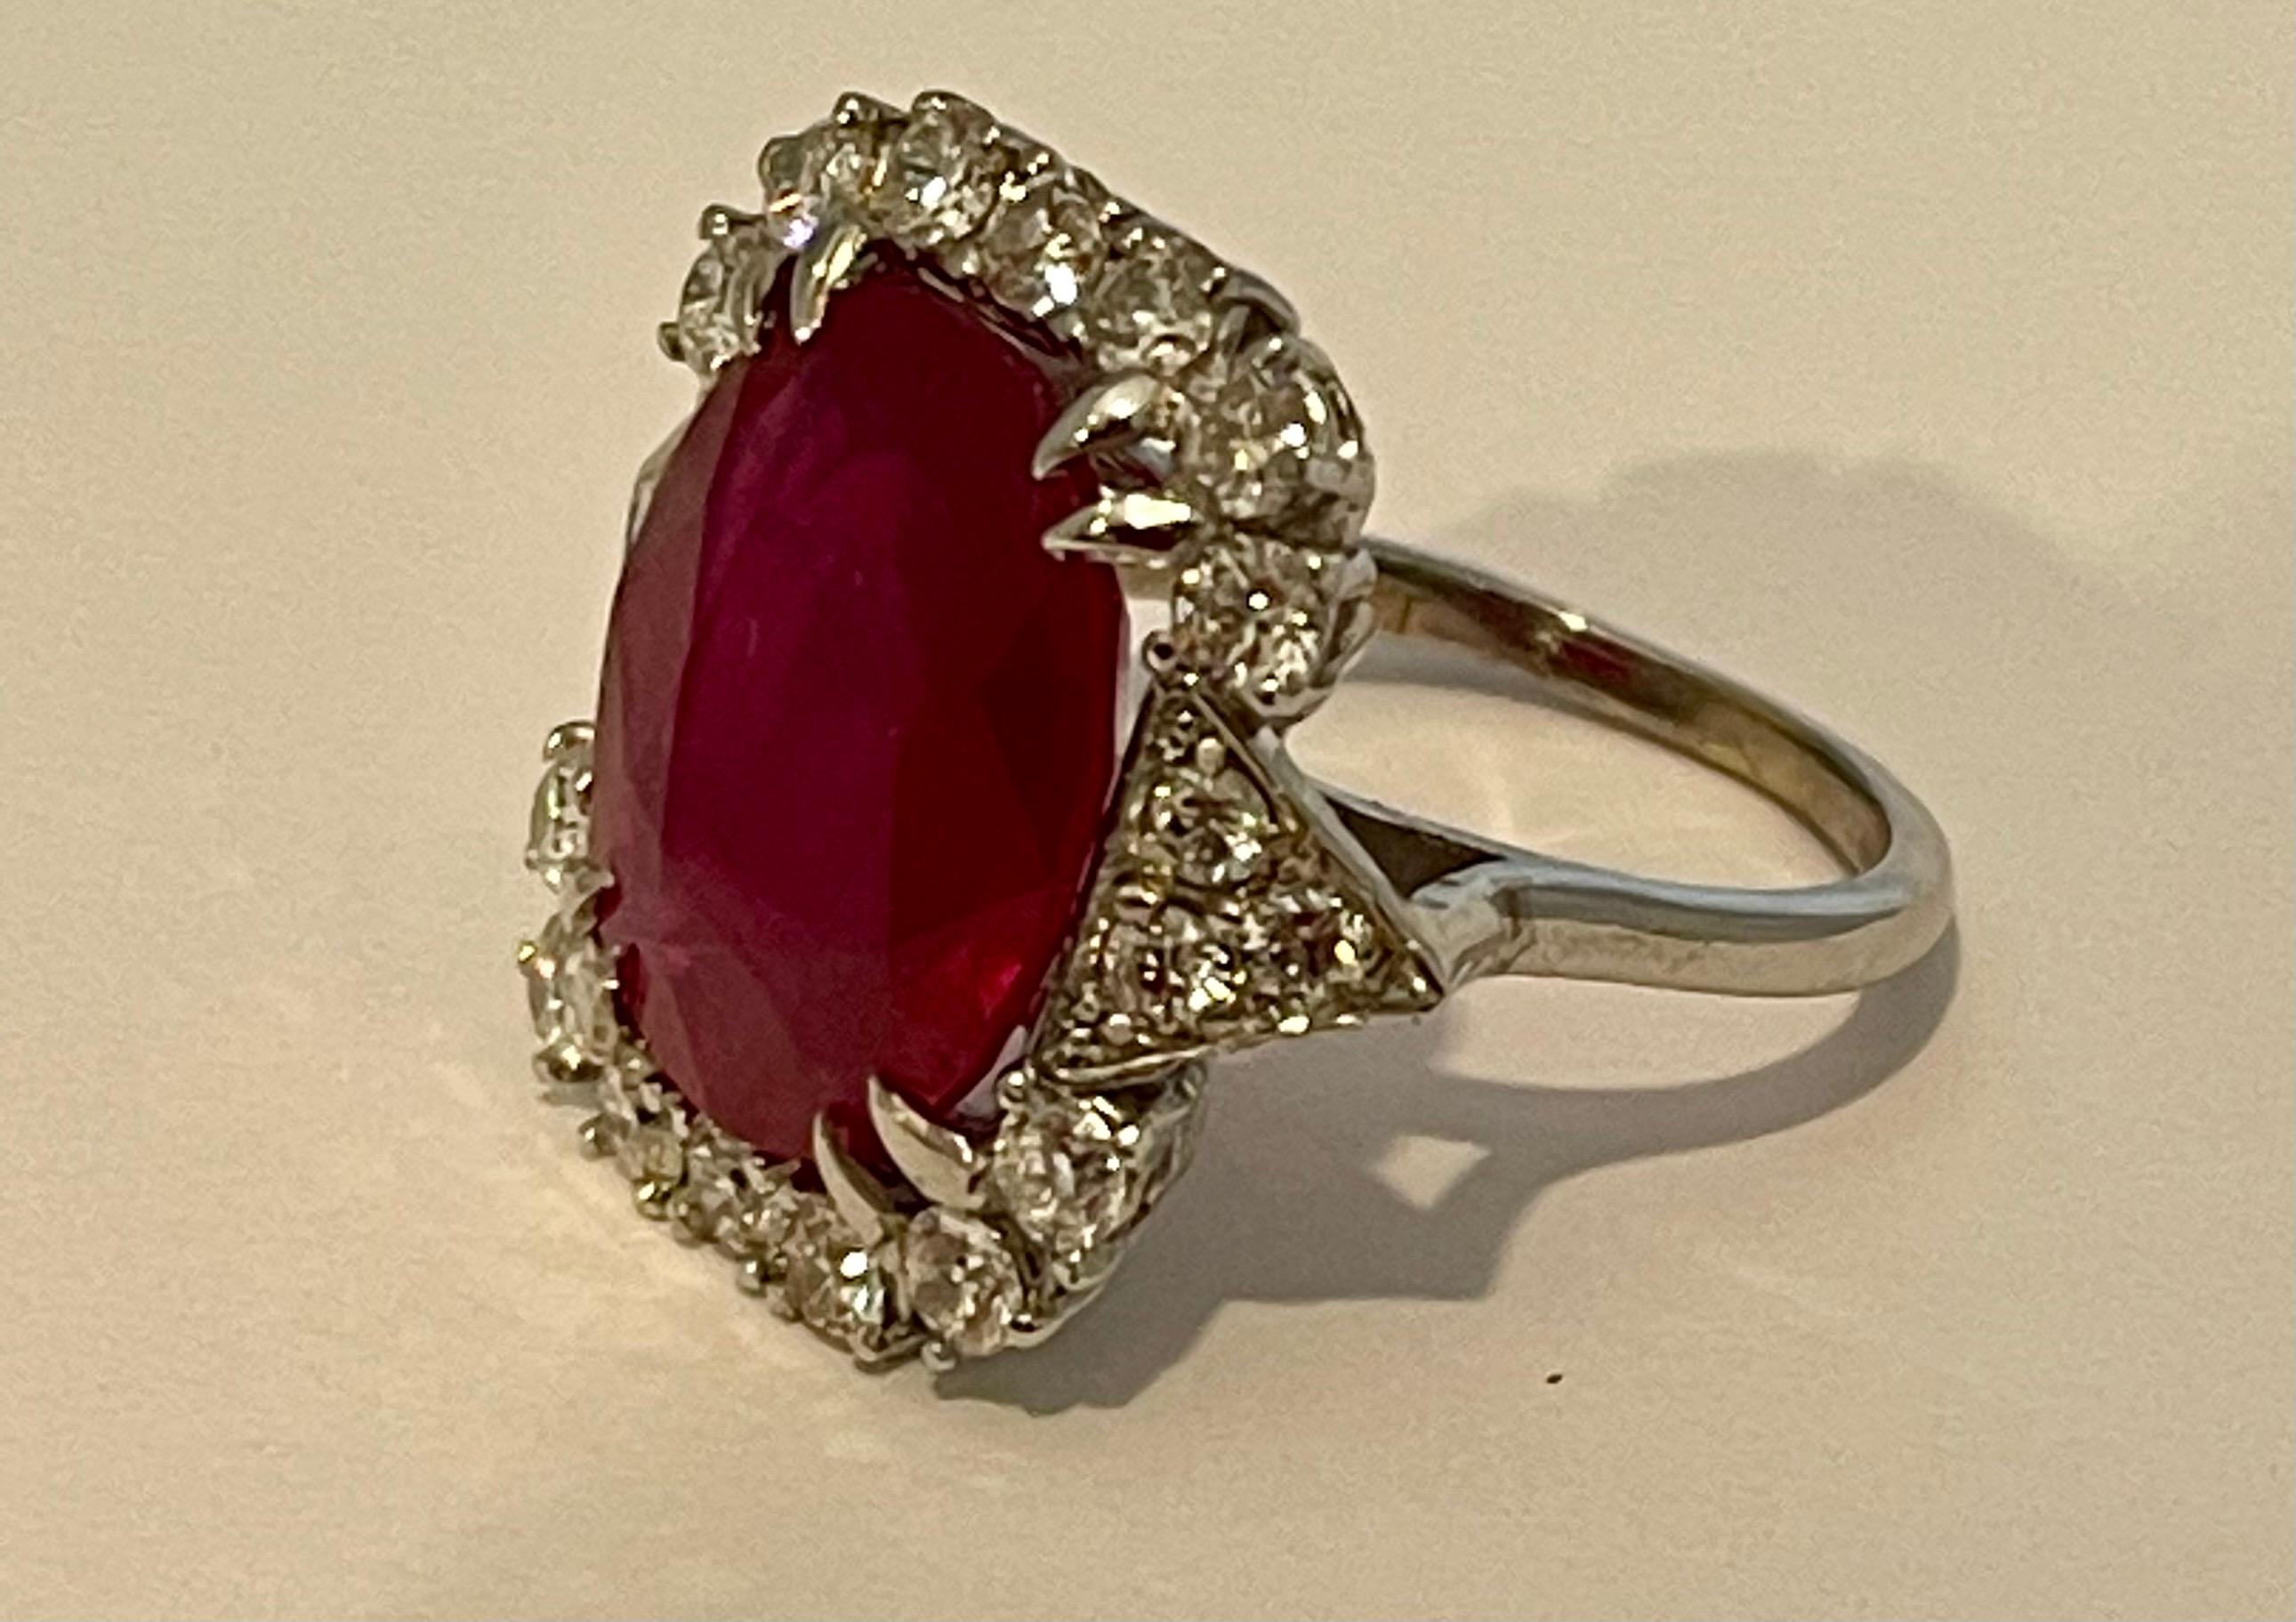 Vintage 12 Carat Emerald Cut Treated Ruby and Diamond Ring in Platinum 7